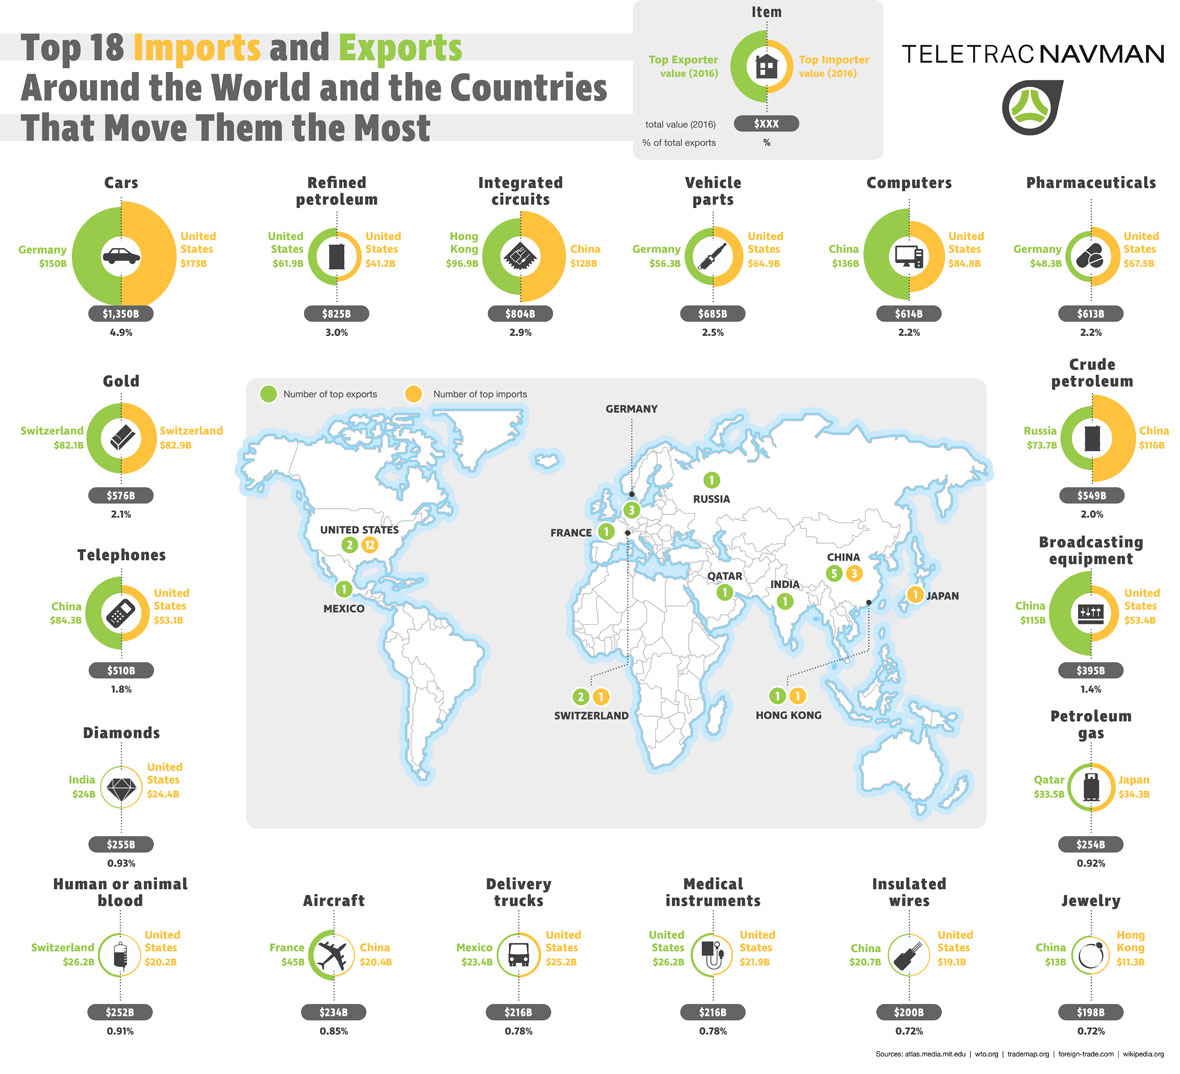 Top Imports and Exports Around the World - TeletracNavman.com Infographic